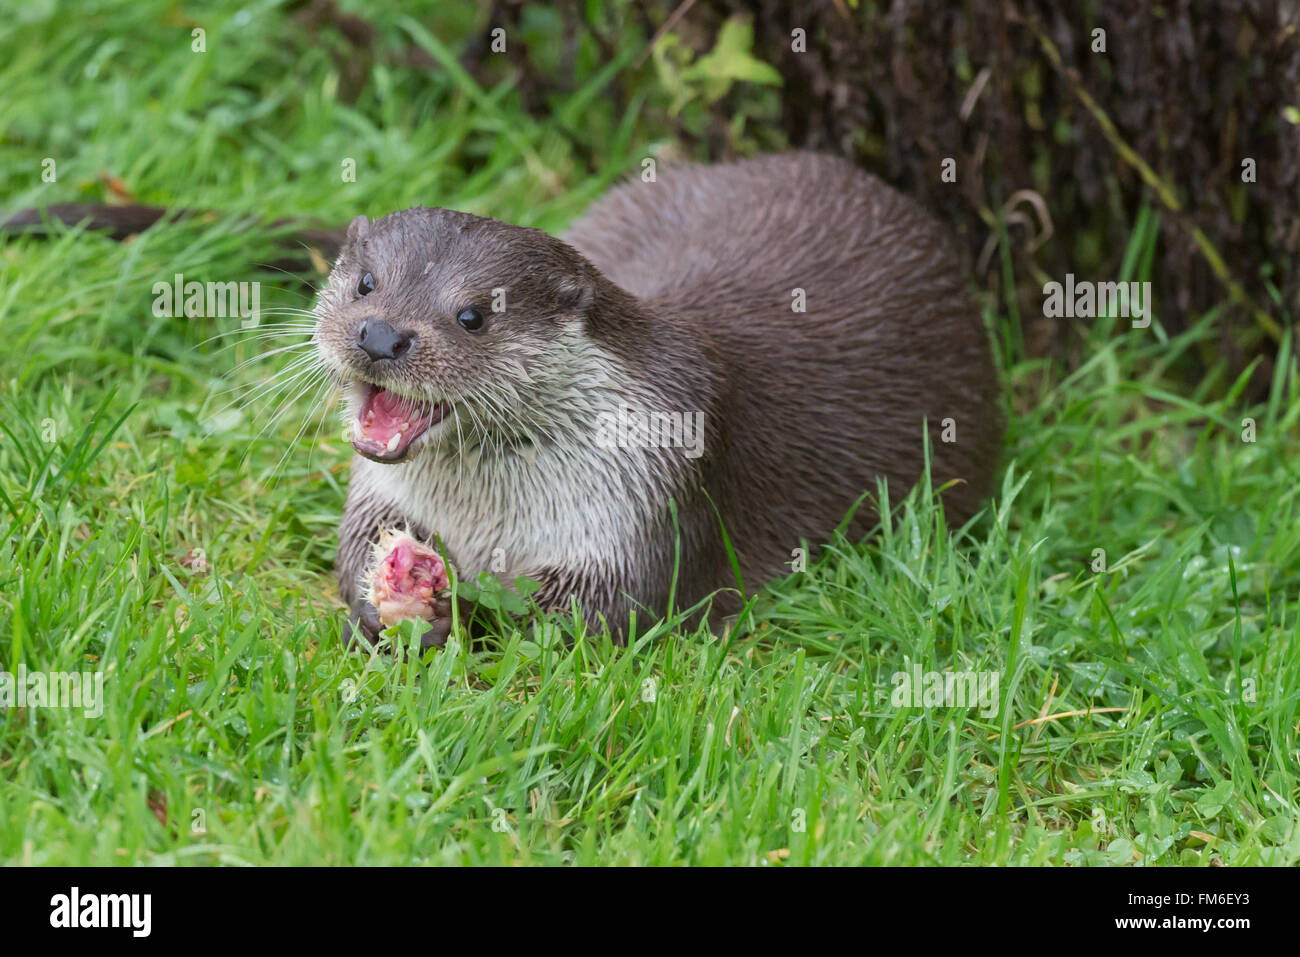 Otter {Lutra lutra} at British wildlife centre, feeding on chicken leg. The animal appears to be smiling. UK, November Stock Photo